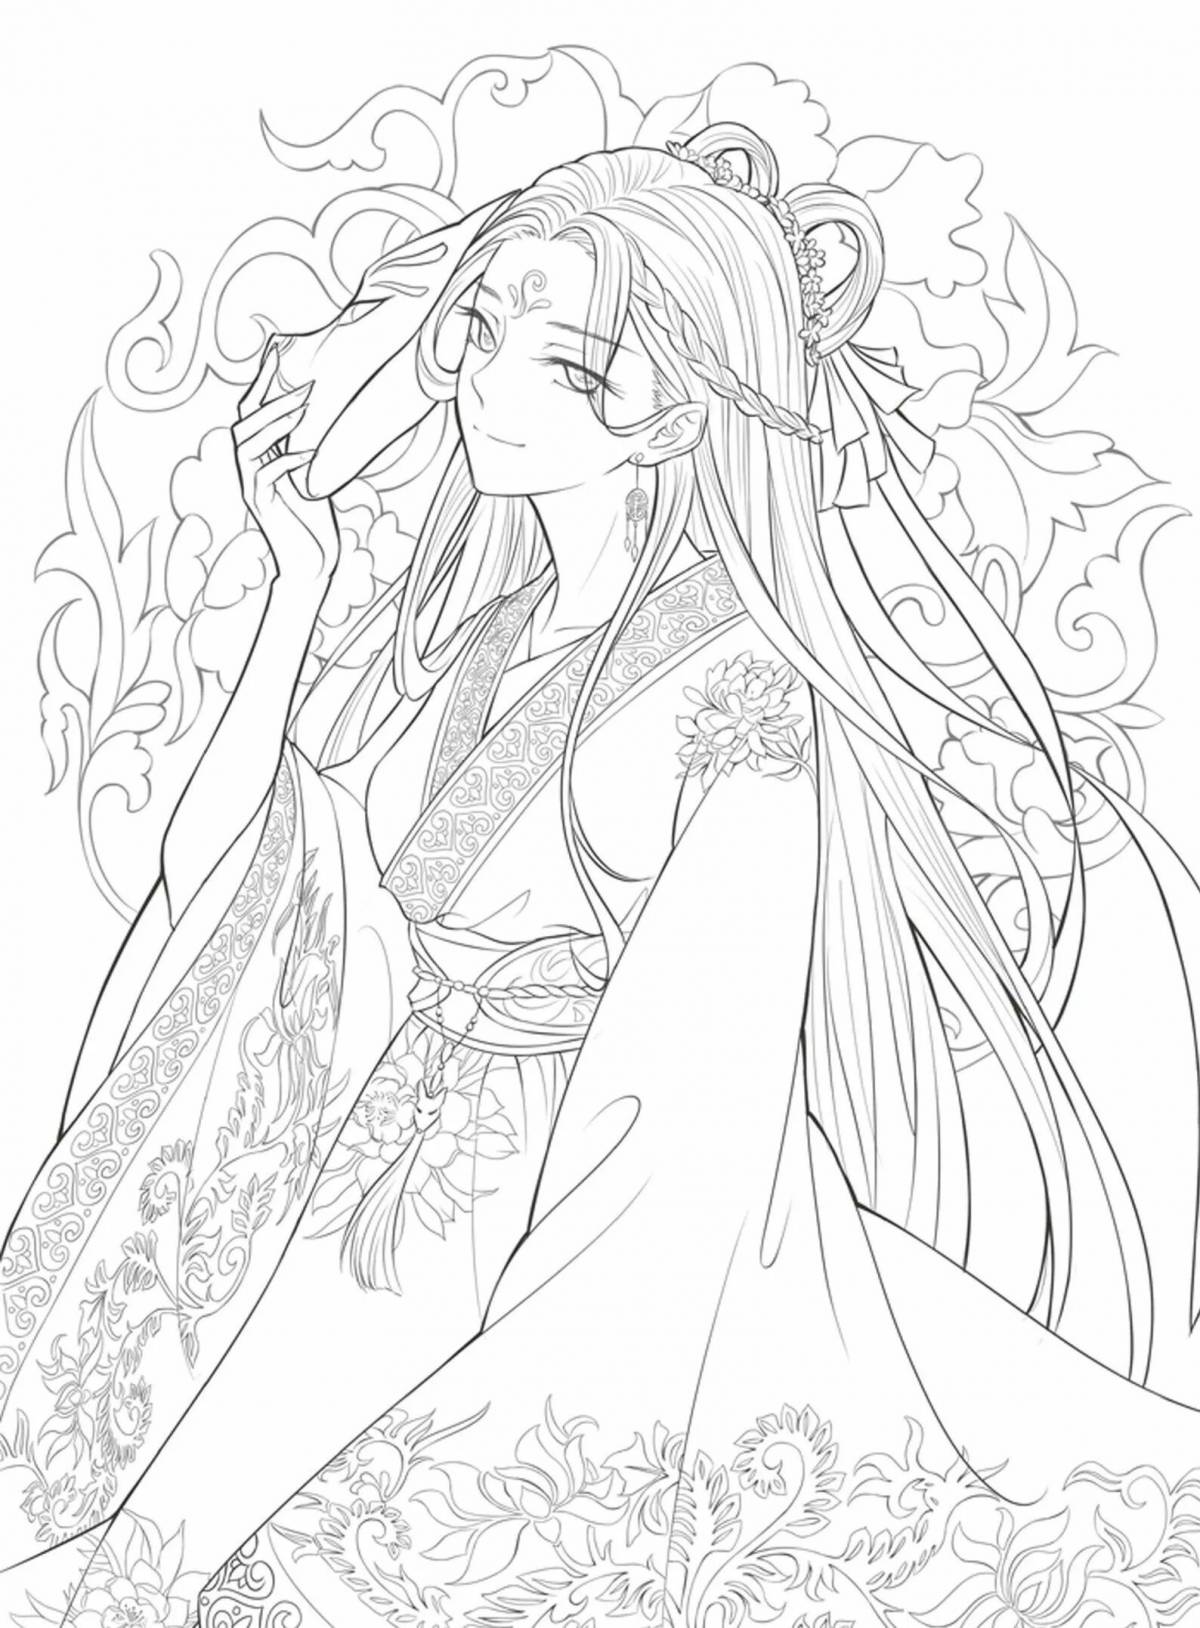 An alluring anti-stress coloring book in anime style